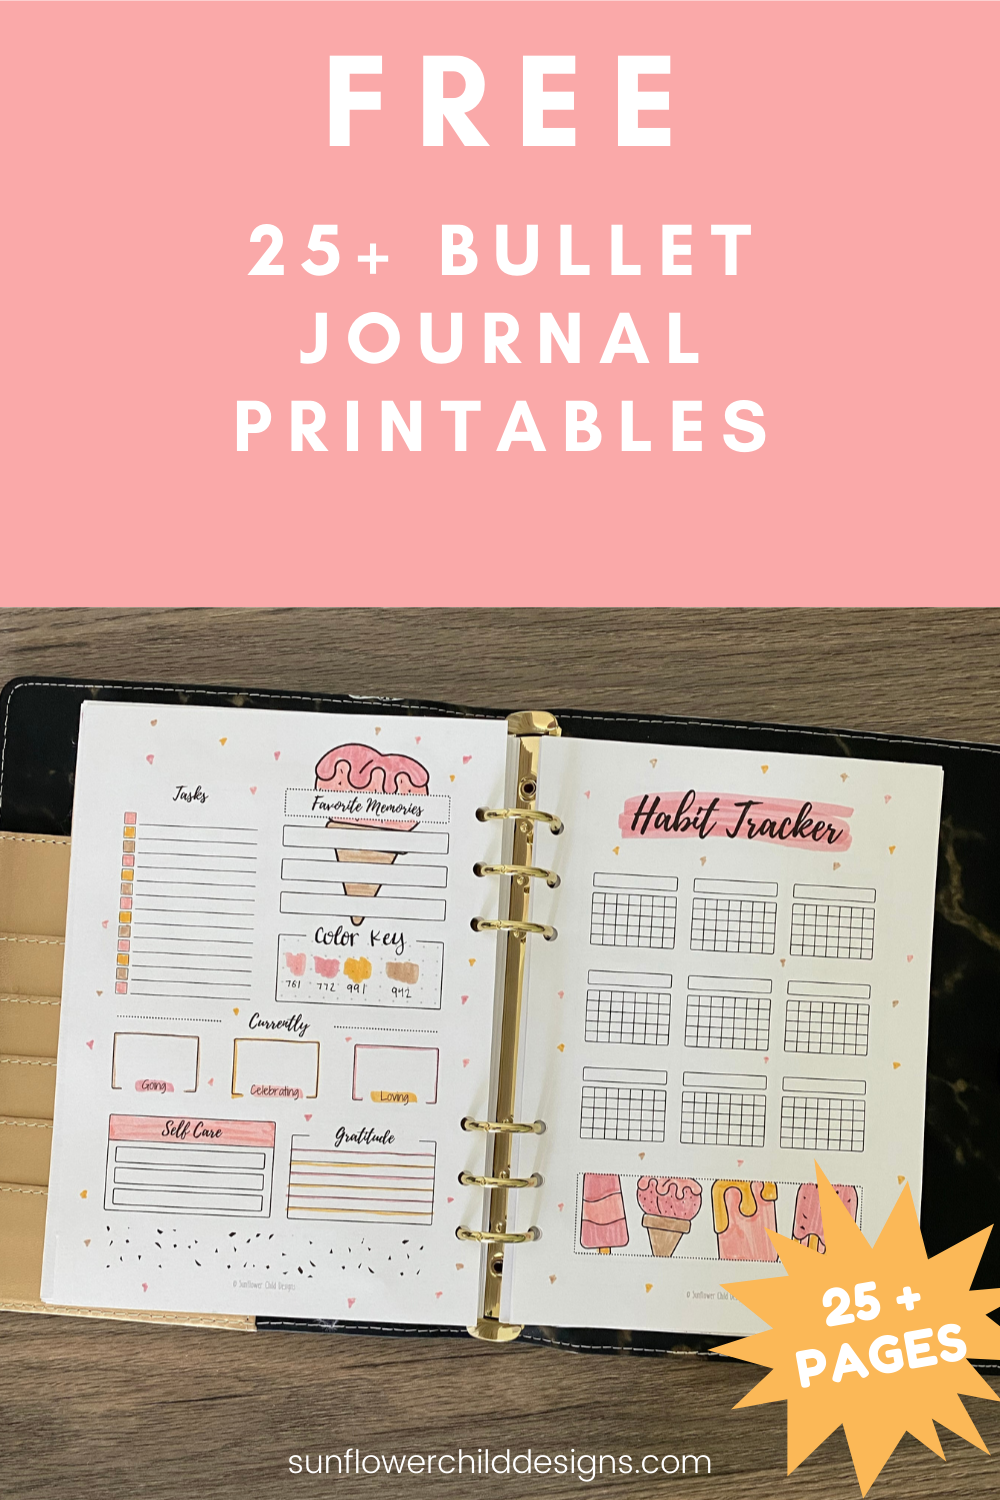 Free Bullet Journal Printables 25+ Pages with Doodles — Sunflower Child ...